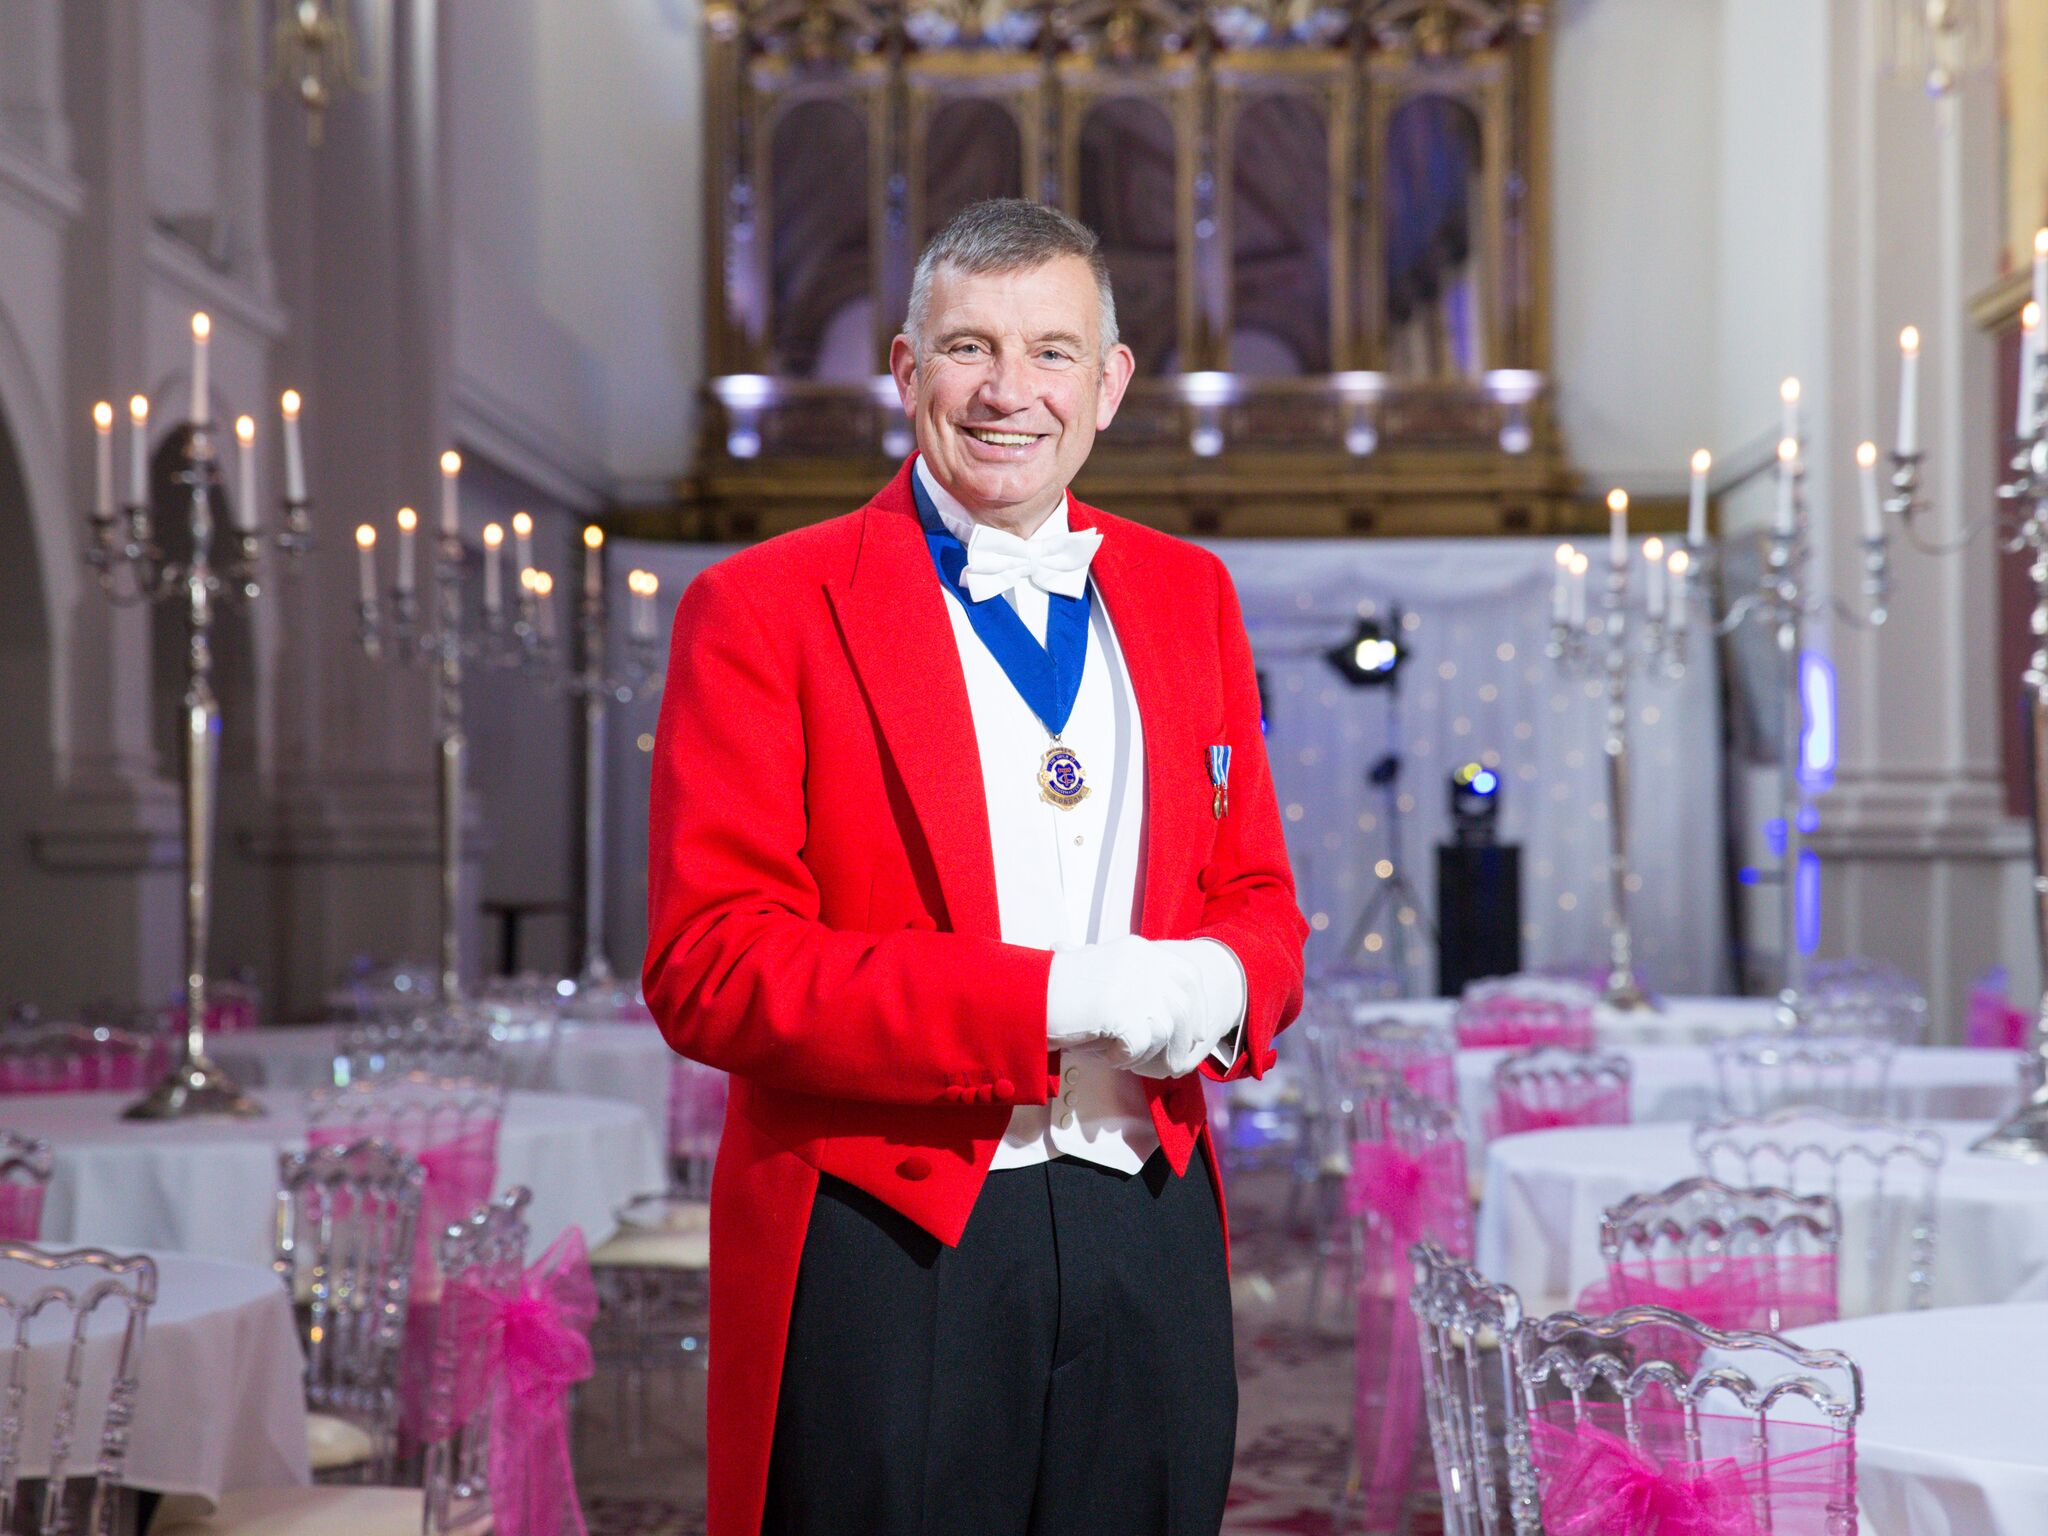 Peter Tautz - The Right Toastmaster is essential for your Ladies Night